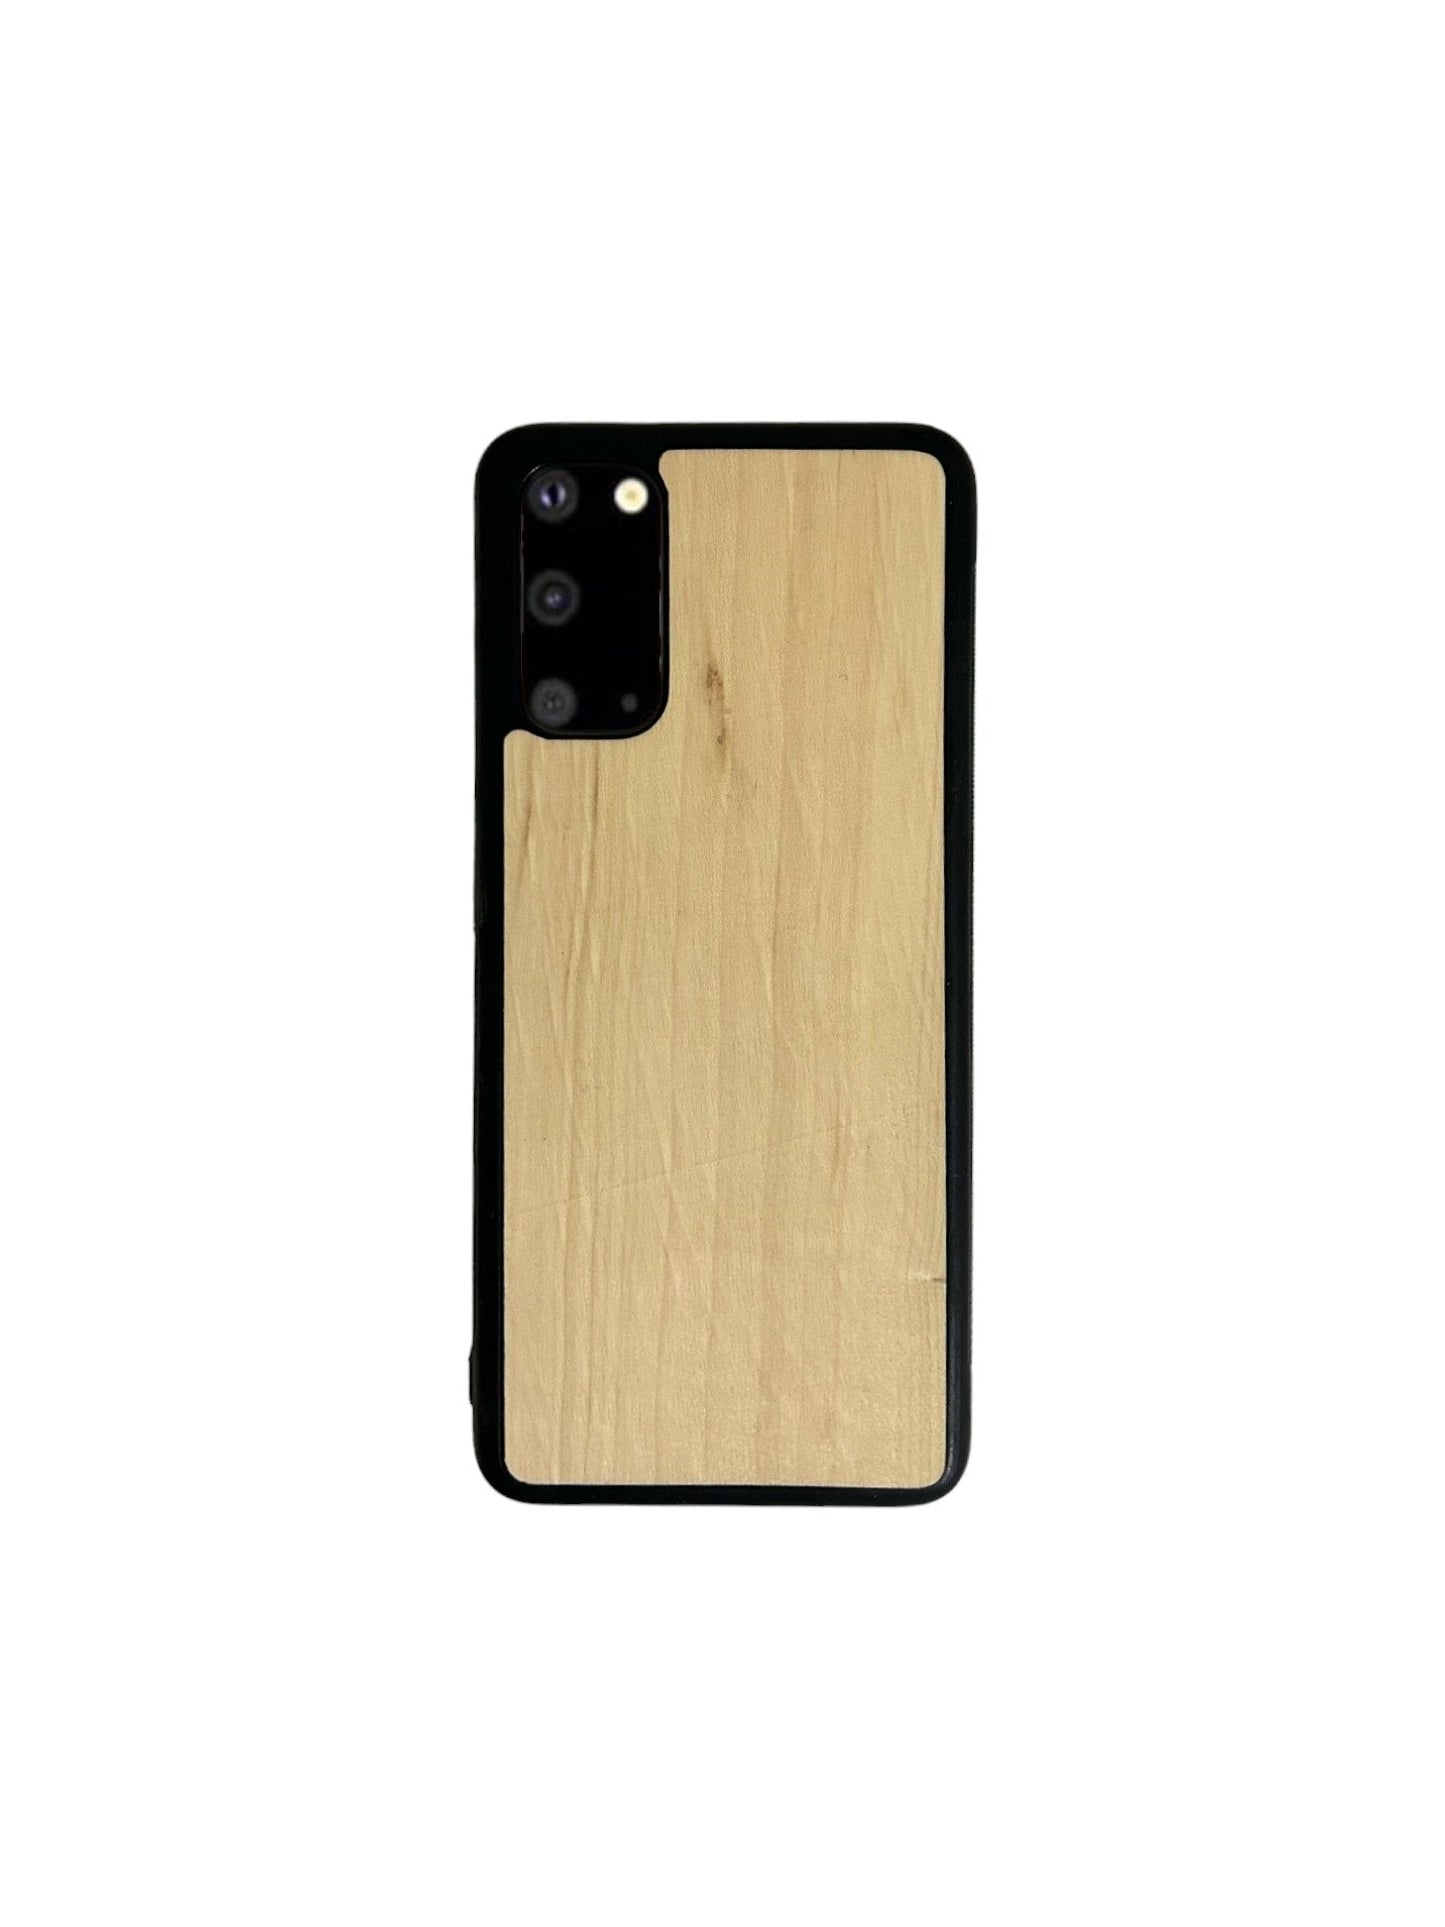 Samsung Galaxy Note case - The simple